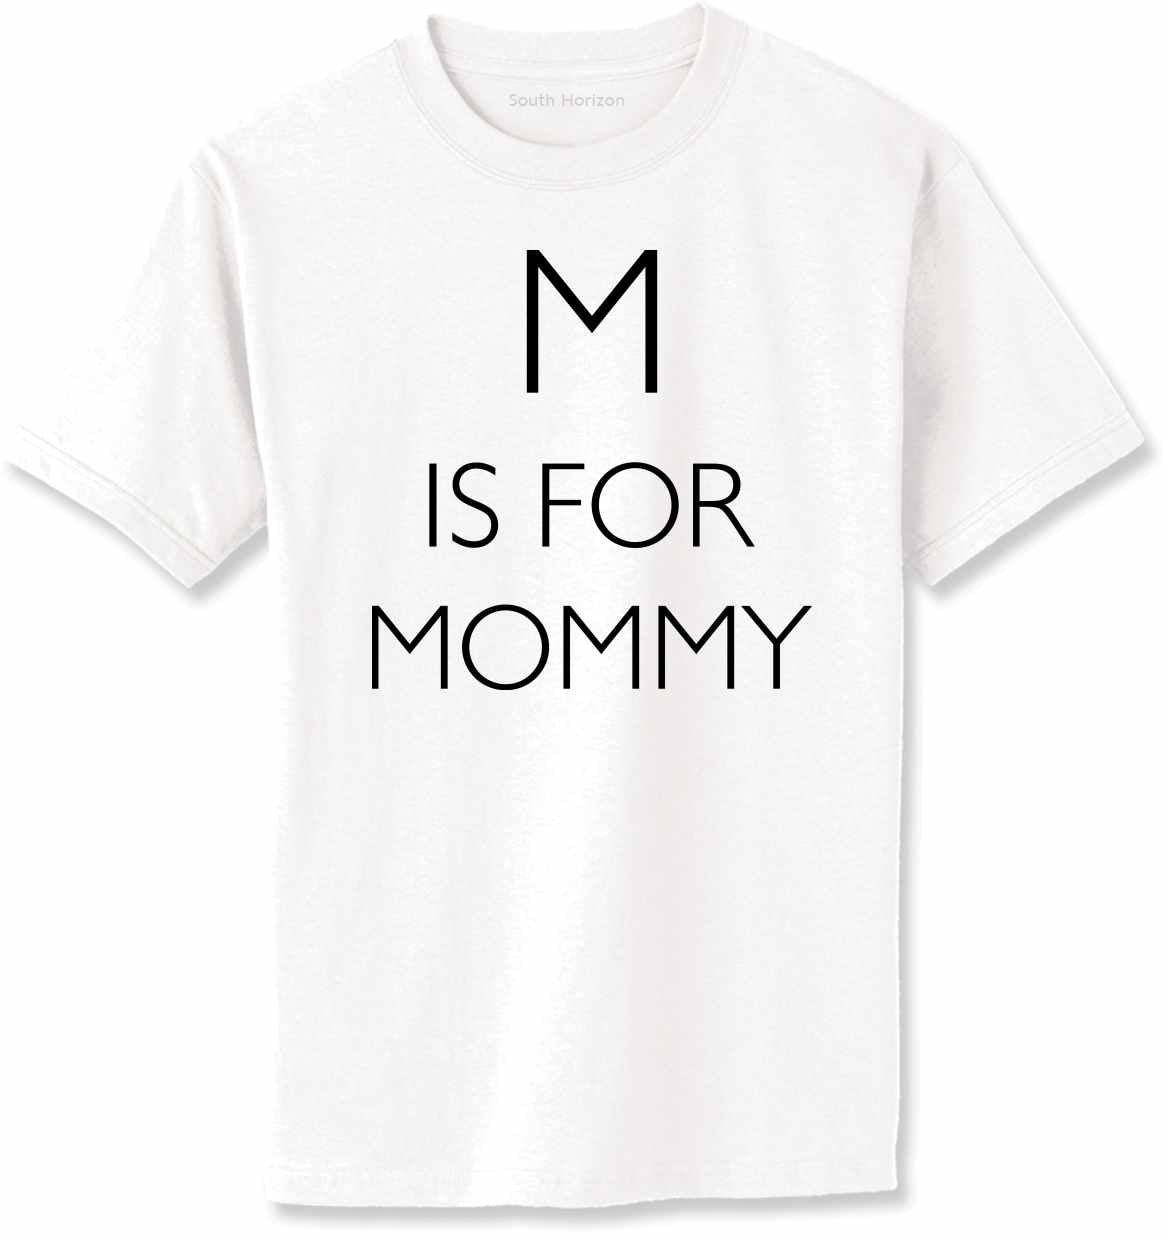 M is for Mommy on Adult T-Shirt (#1209-1)